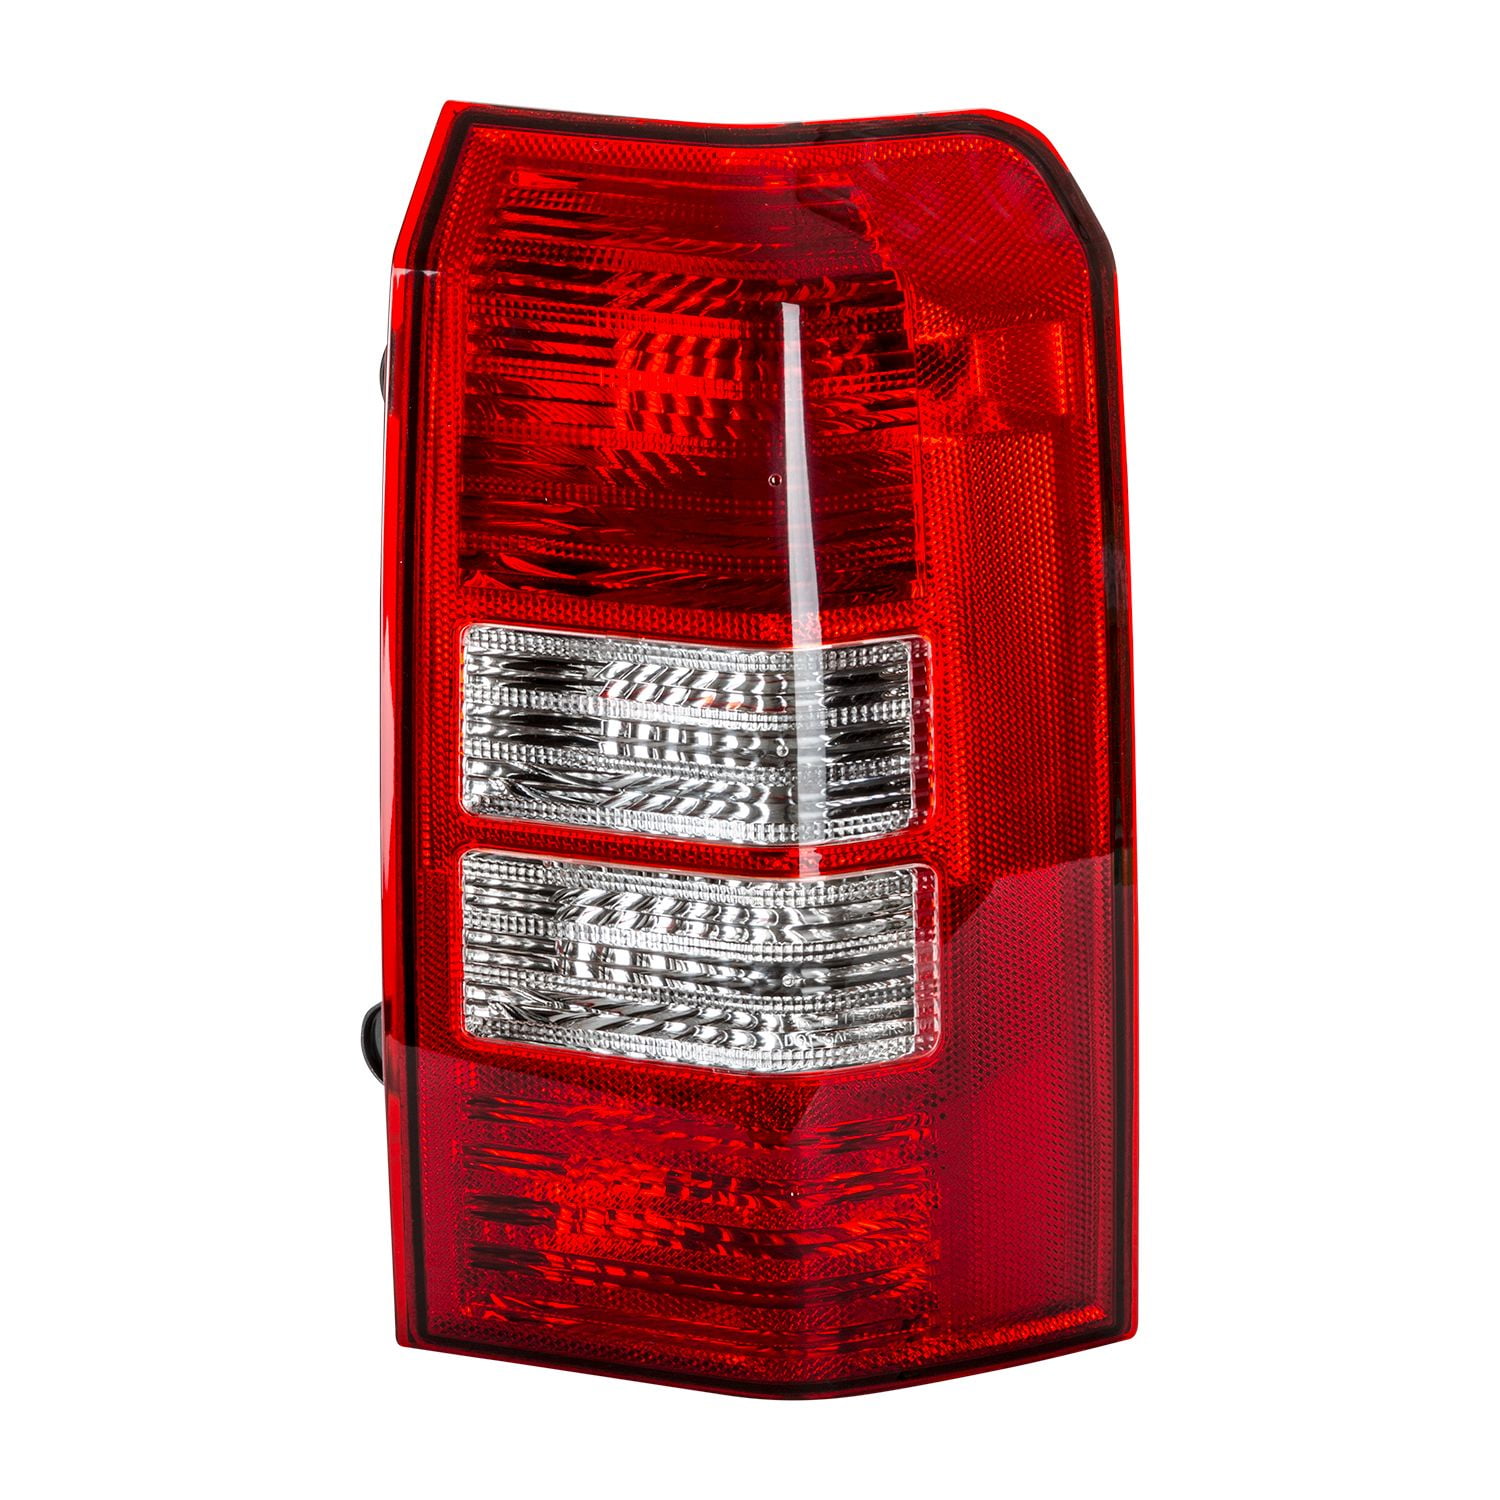 TYC 11-6423-00-1 Jeep Patriot Right Replacement Tail Lamp 